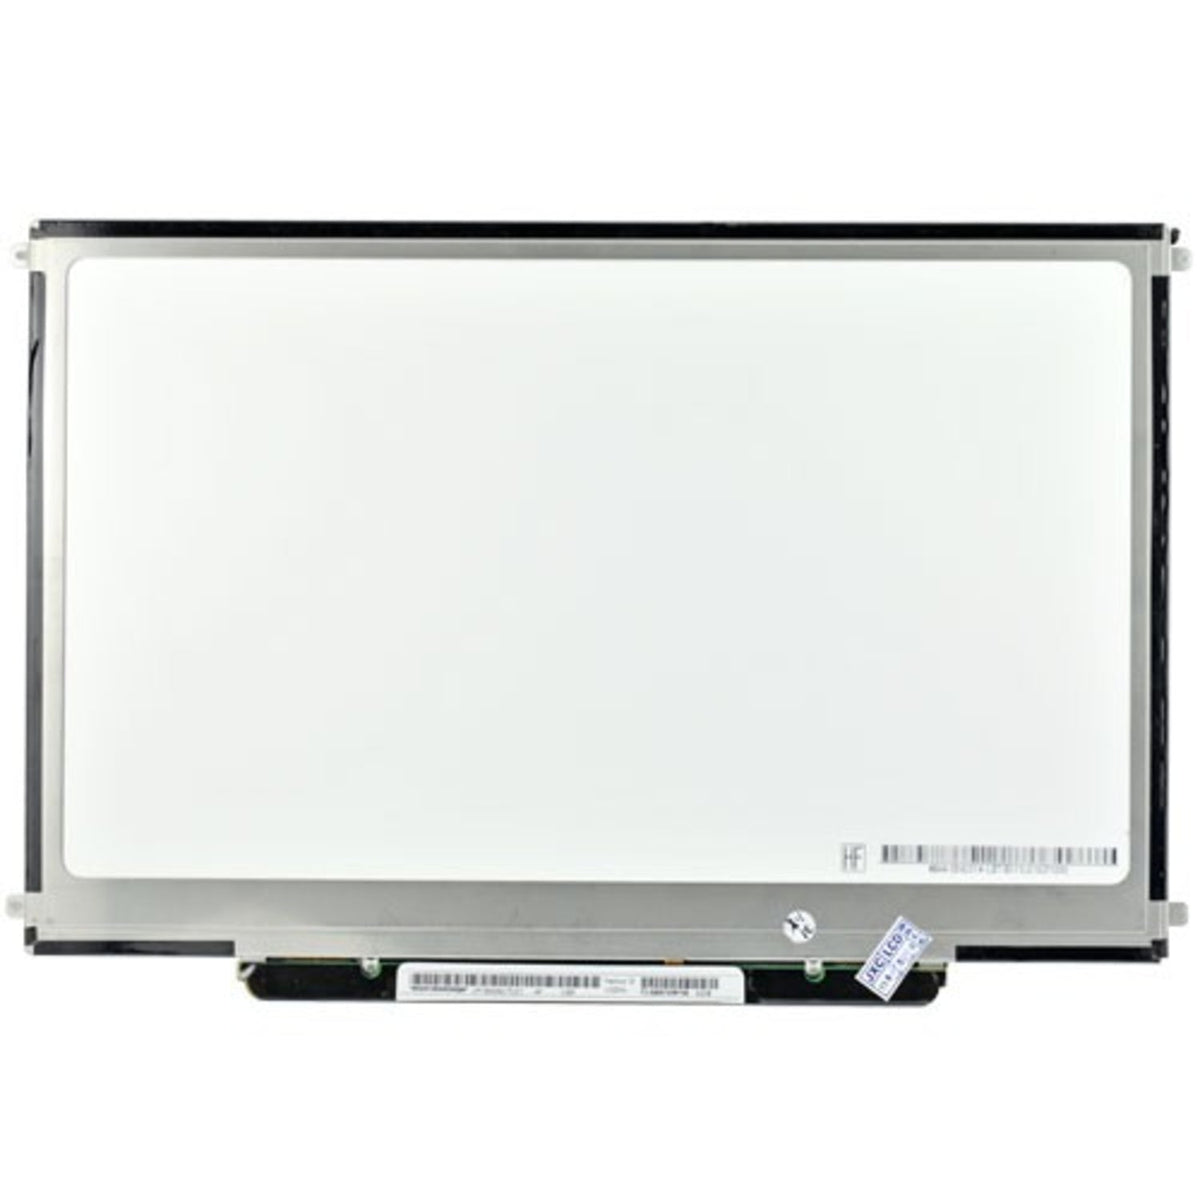 New & Genuine LCD Screen of A1278 For Apple MacBook Unibody 13" LTN133AT09 LATE 2008-MID 2012